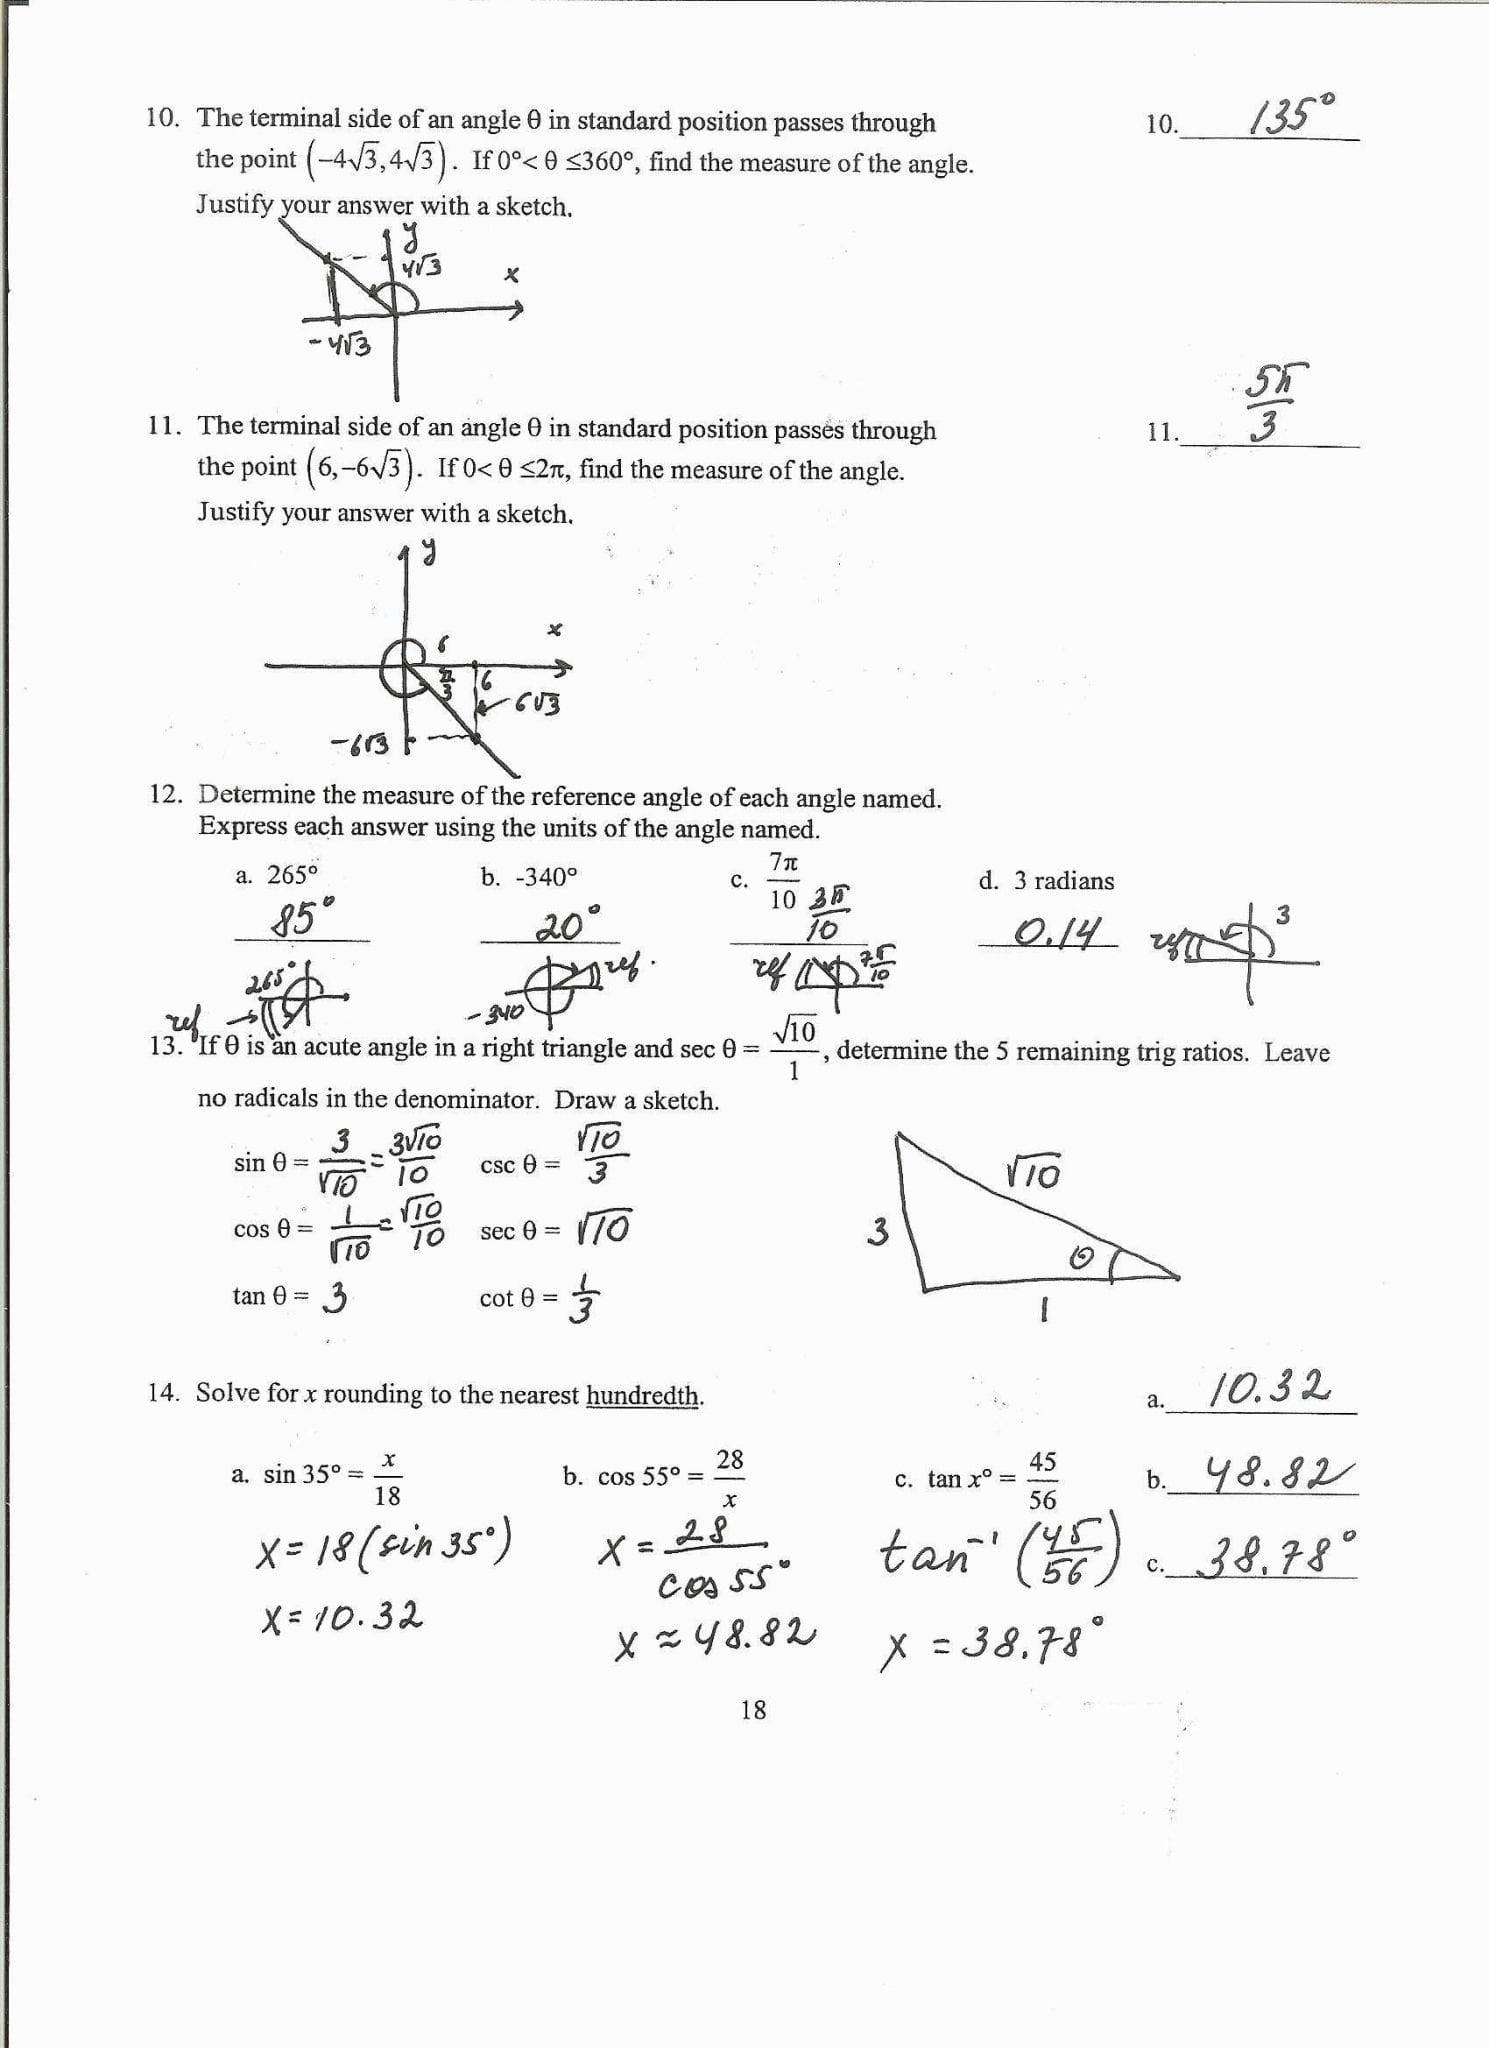 angles-formed-by-parallel-lines-worksheet-answers-milliken-publishing-company-db-excel